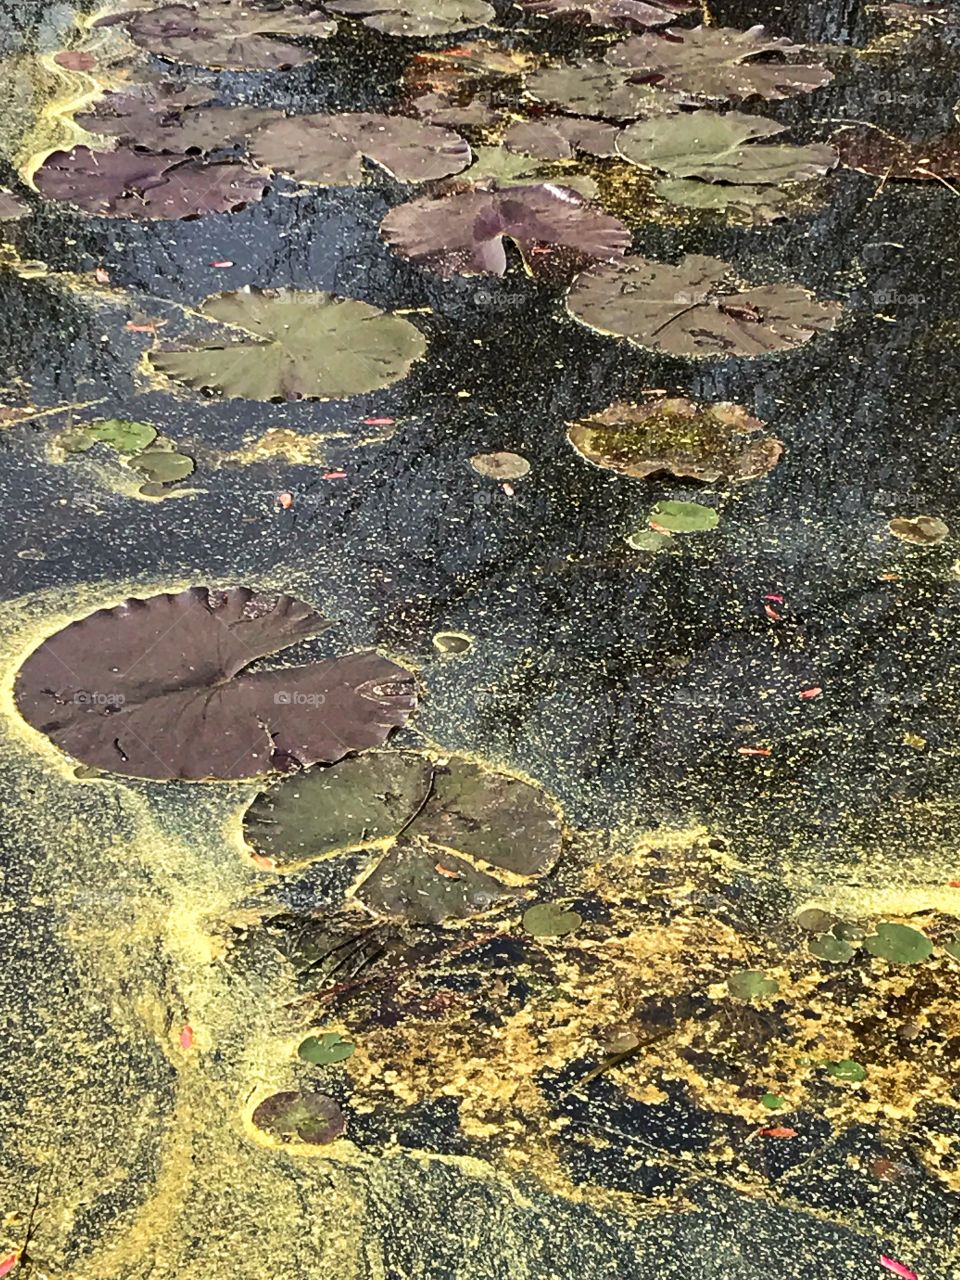 Lily Pads and Pollen sharing a lake seen while hiking